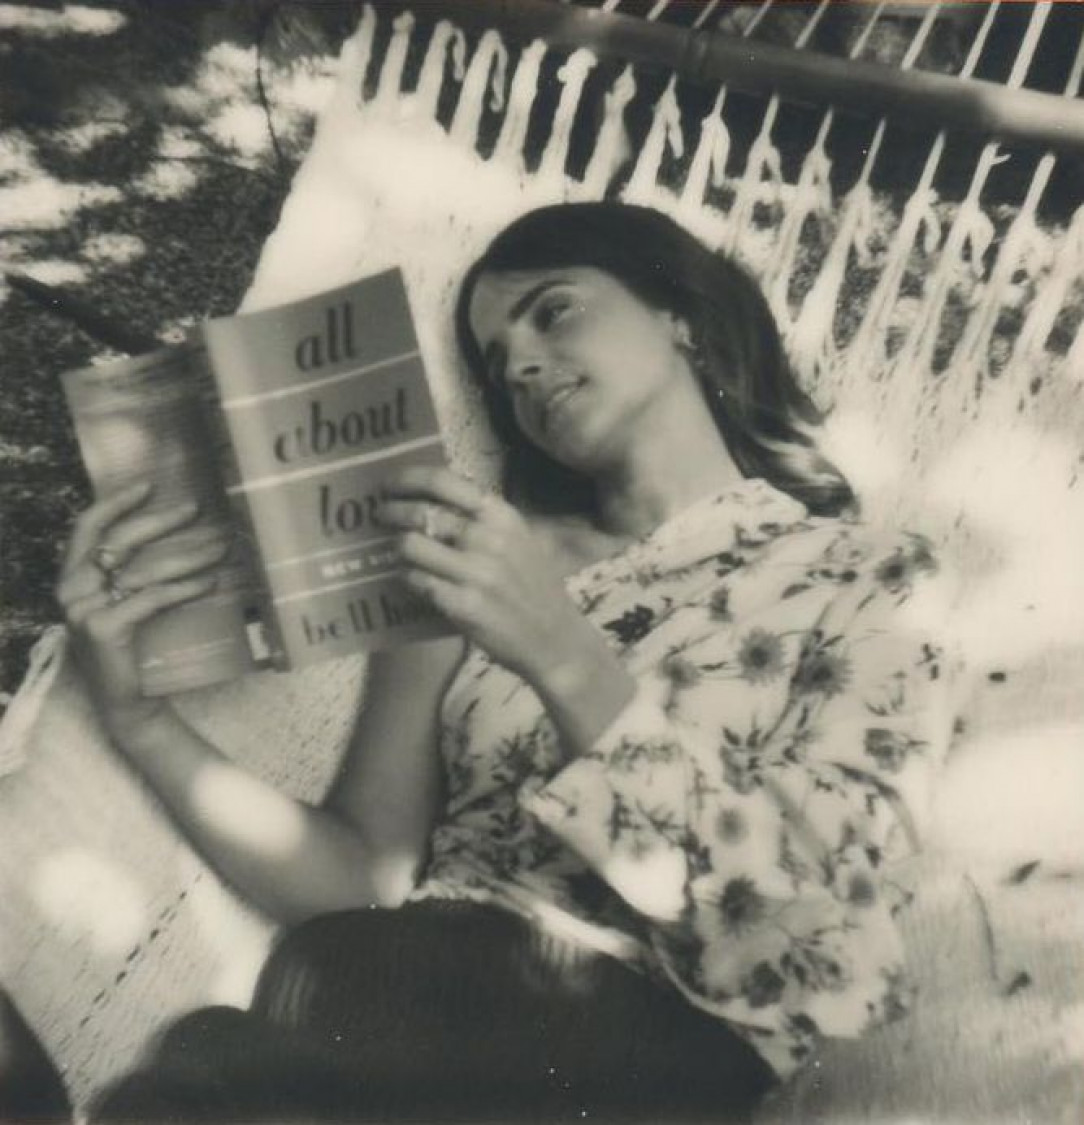 Reading a book, on a hammock